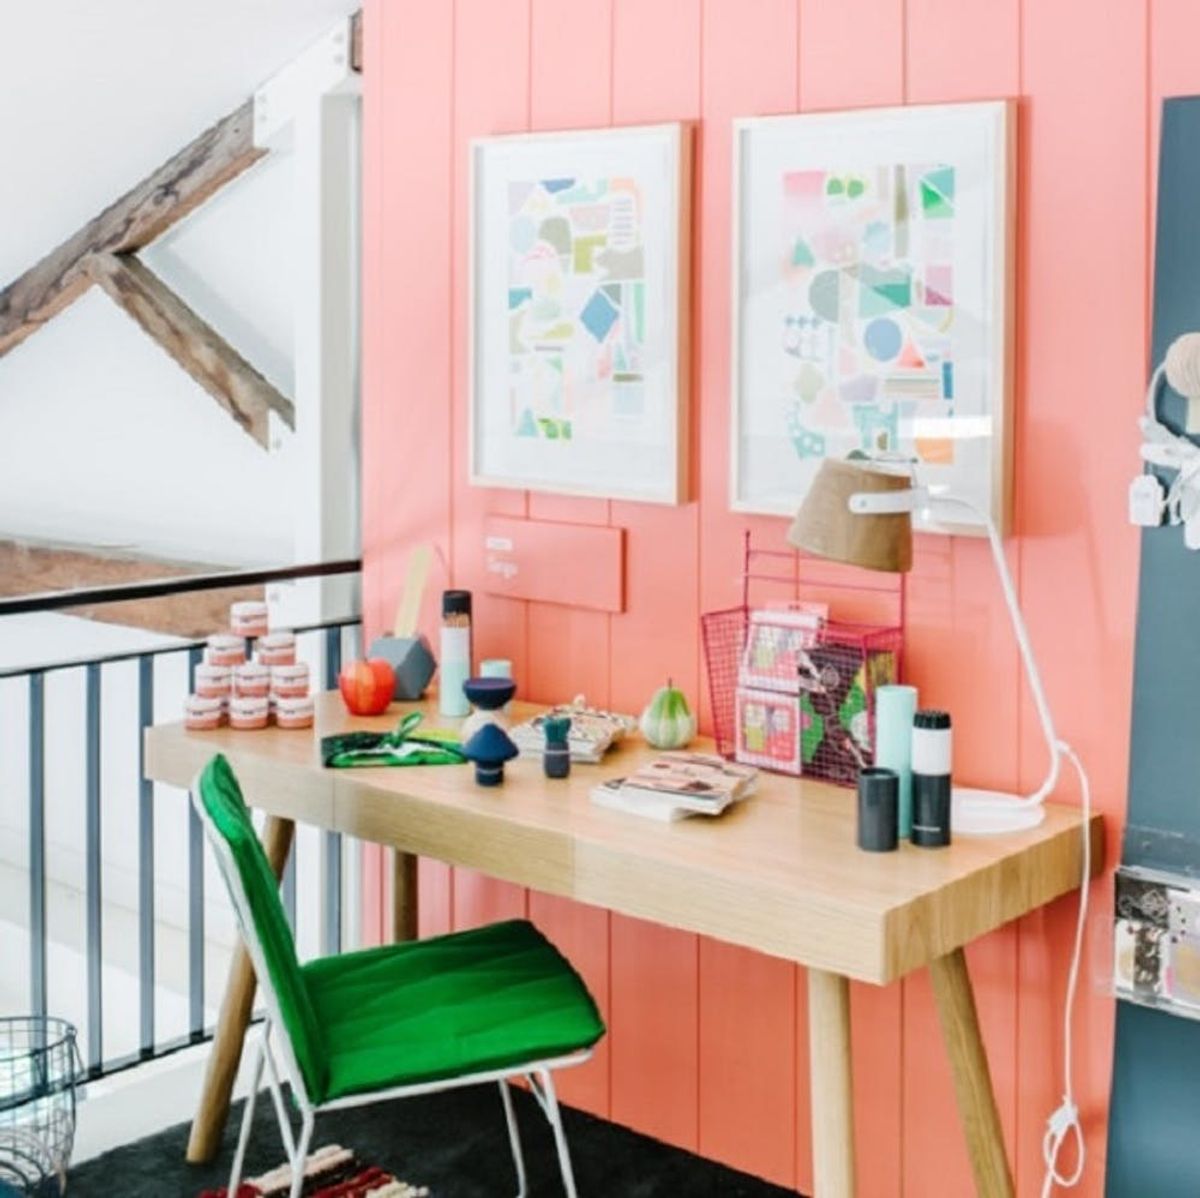 20 Pantone-Approved Ways to Revamp Your Office + Improve Your Work Day